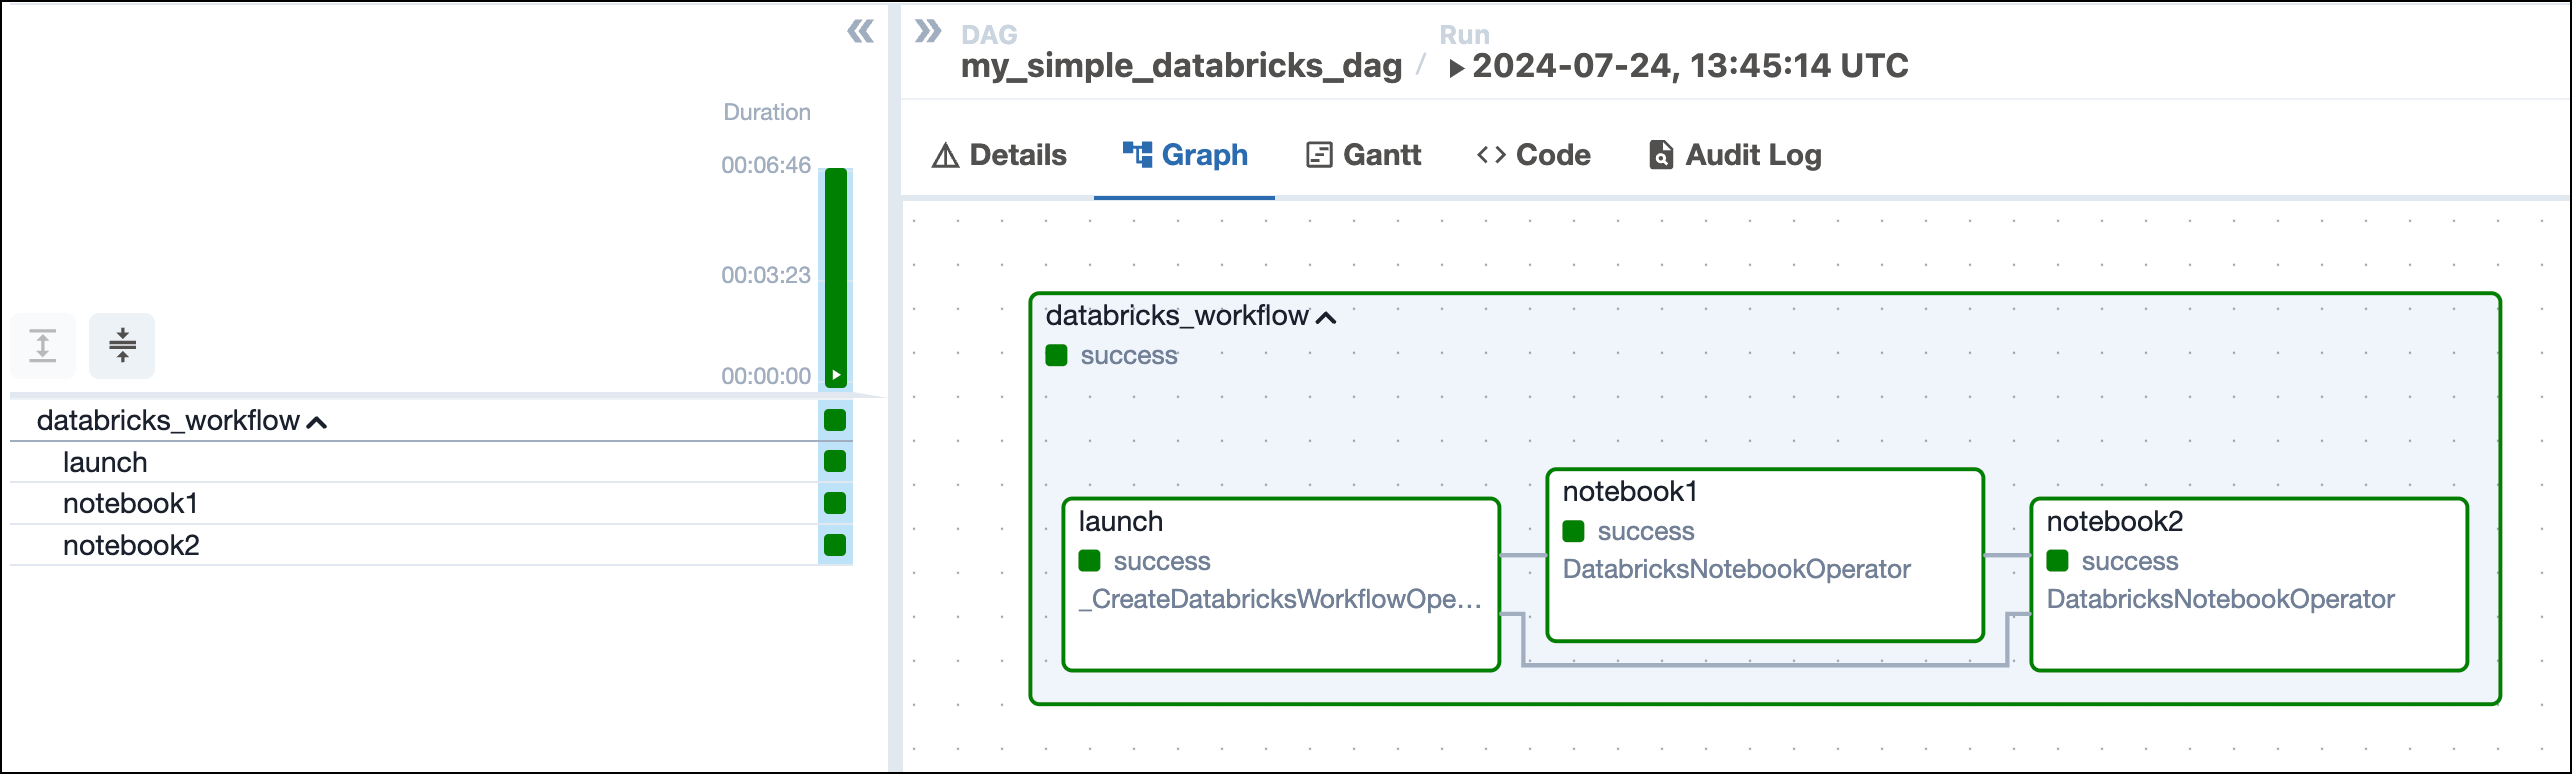 Airflow Databricks DAG graph tab showing a successful run of the DAG with one task group containing three tasks: launch, notebook1 and notebook2.